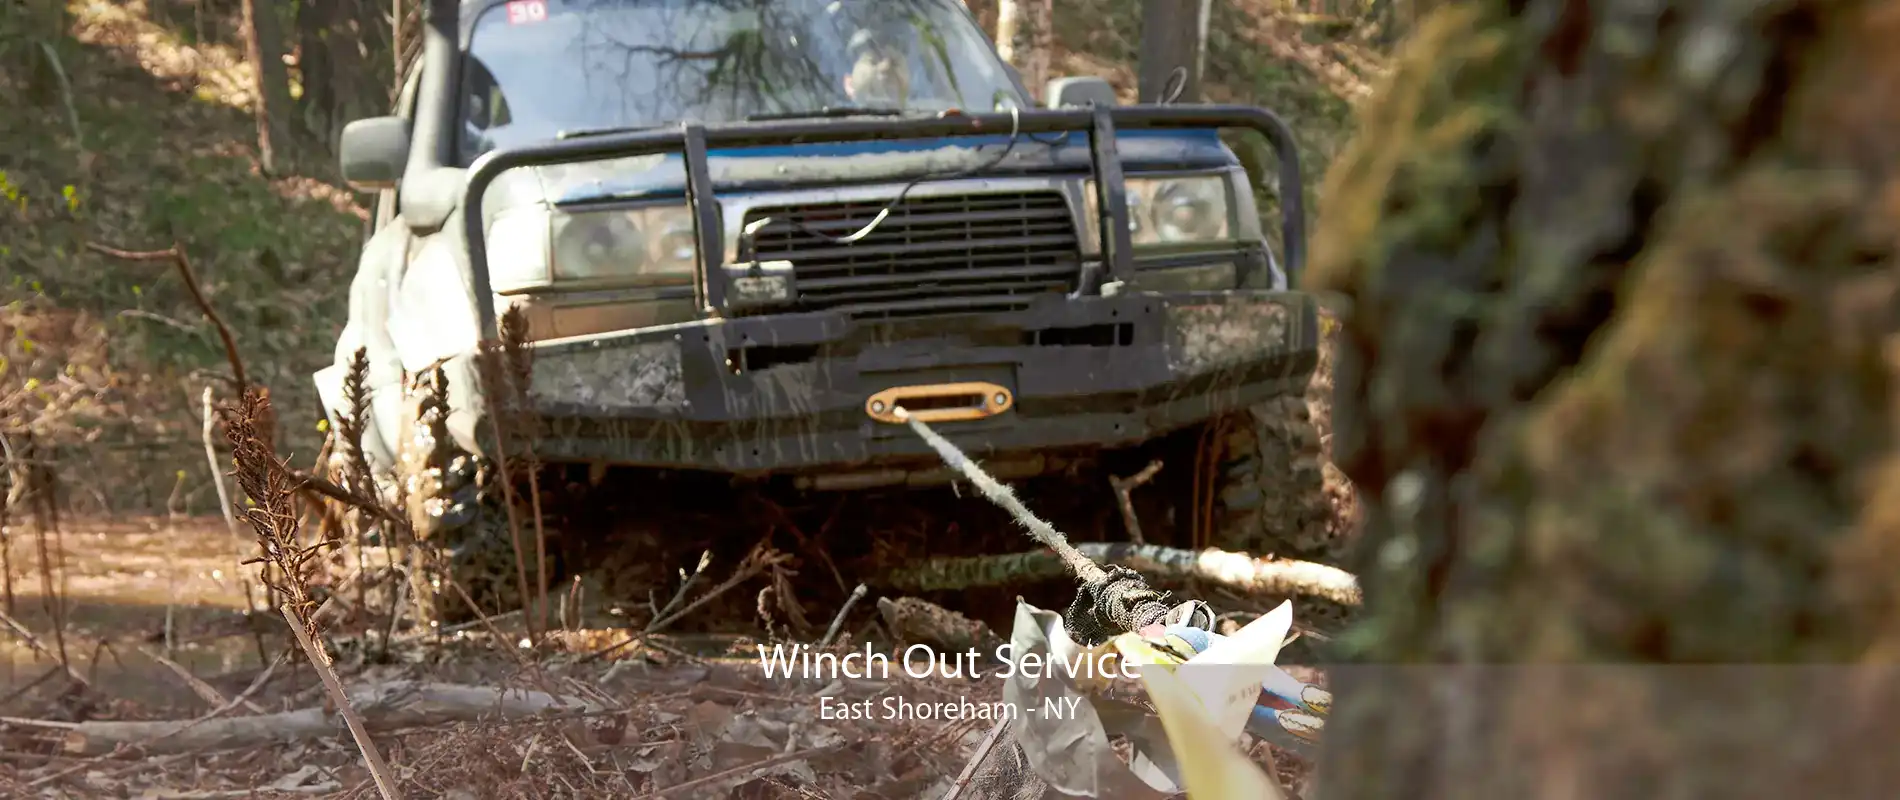 Winch Out Service East Shoreham - NY